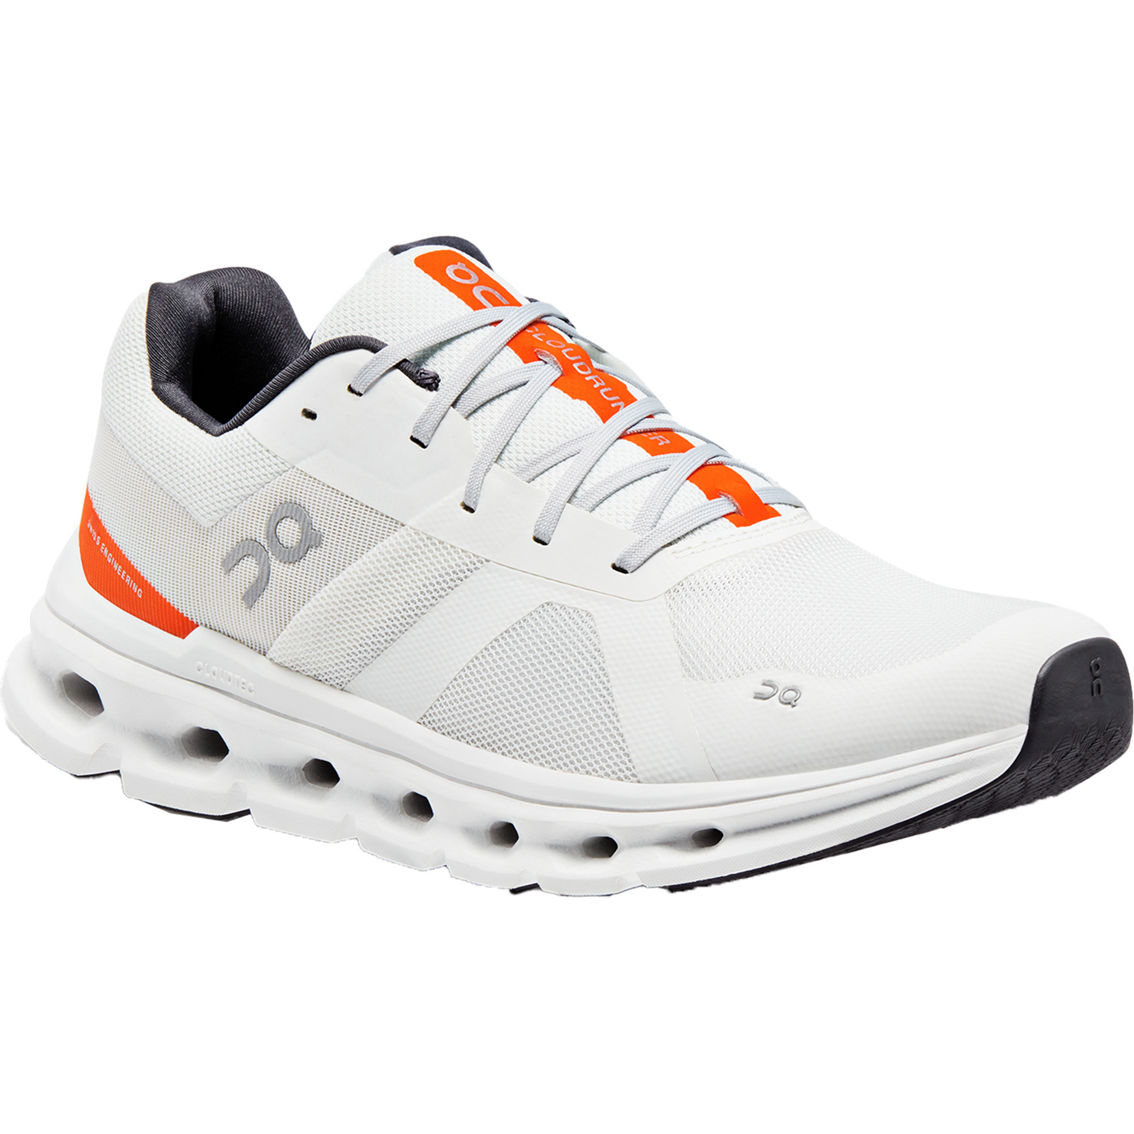 On Men's Cloudrunner Running Shoes | Men's Athletic Shoes | Shoes ...